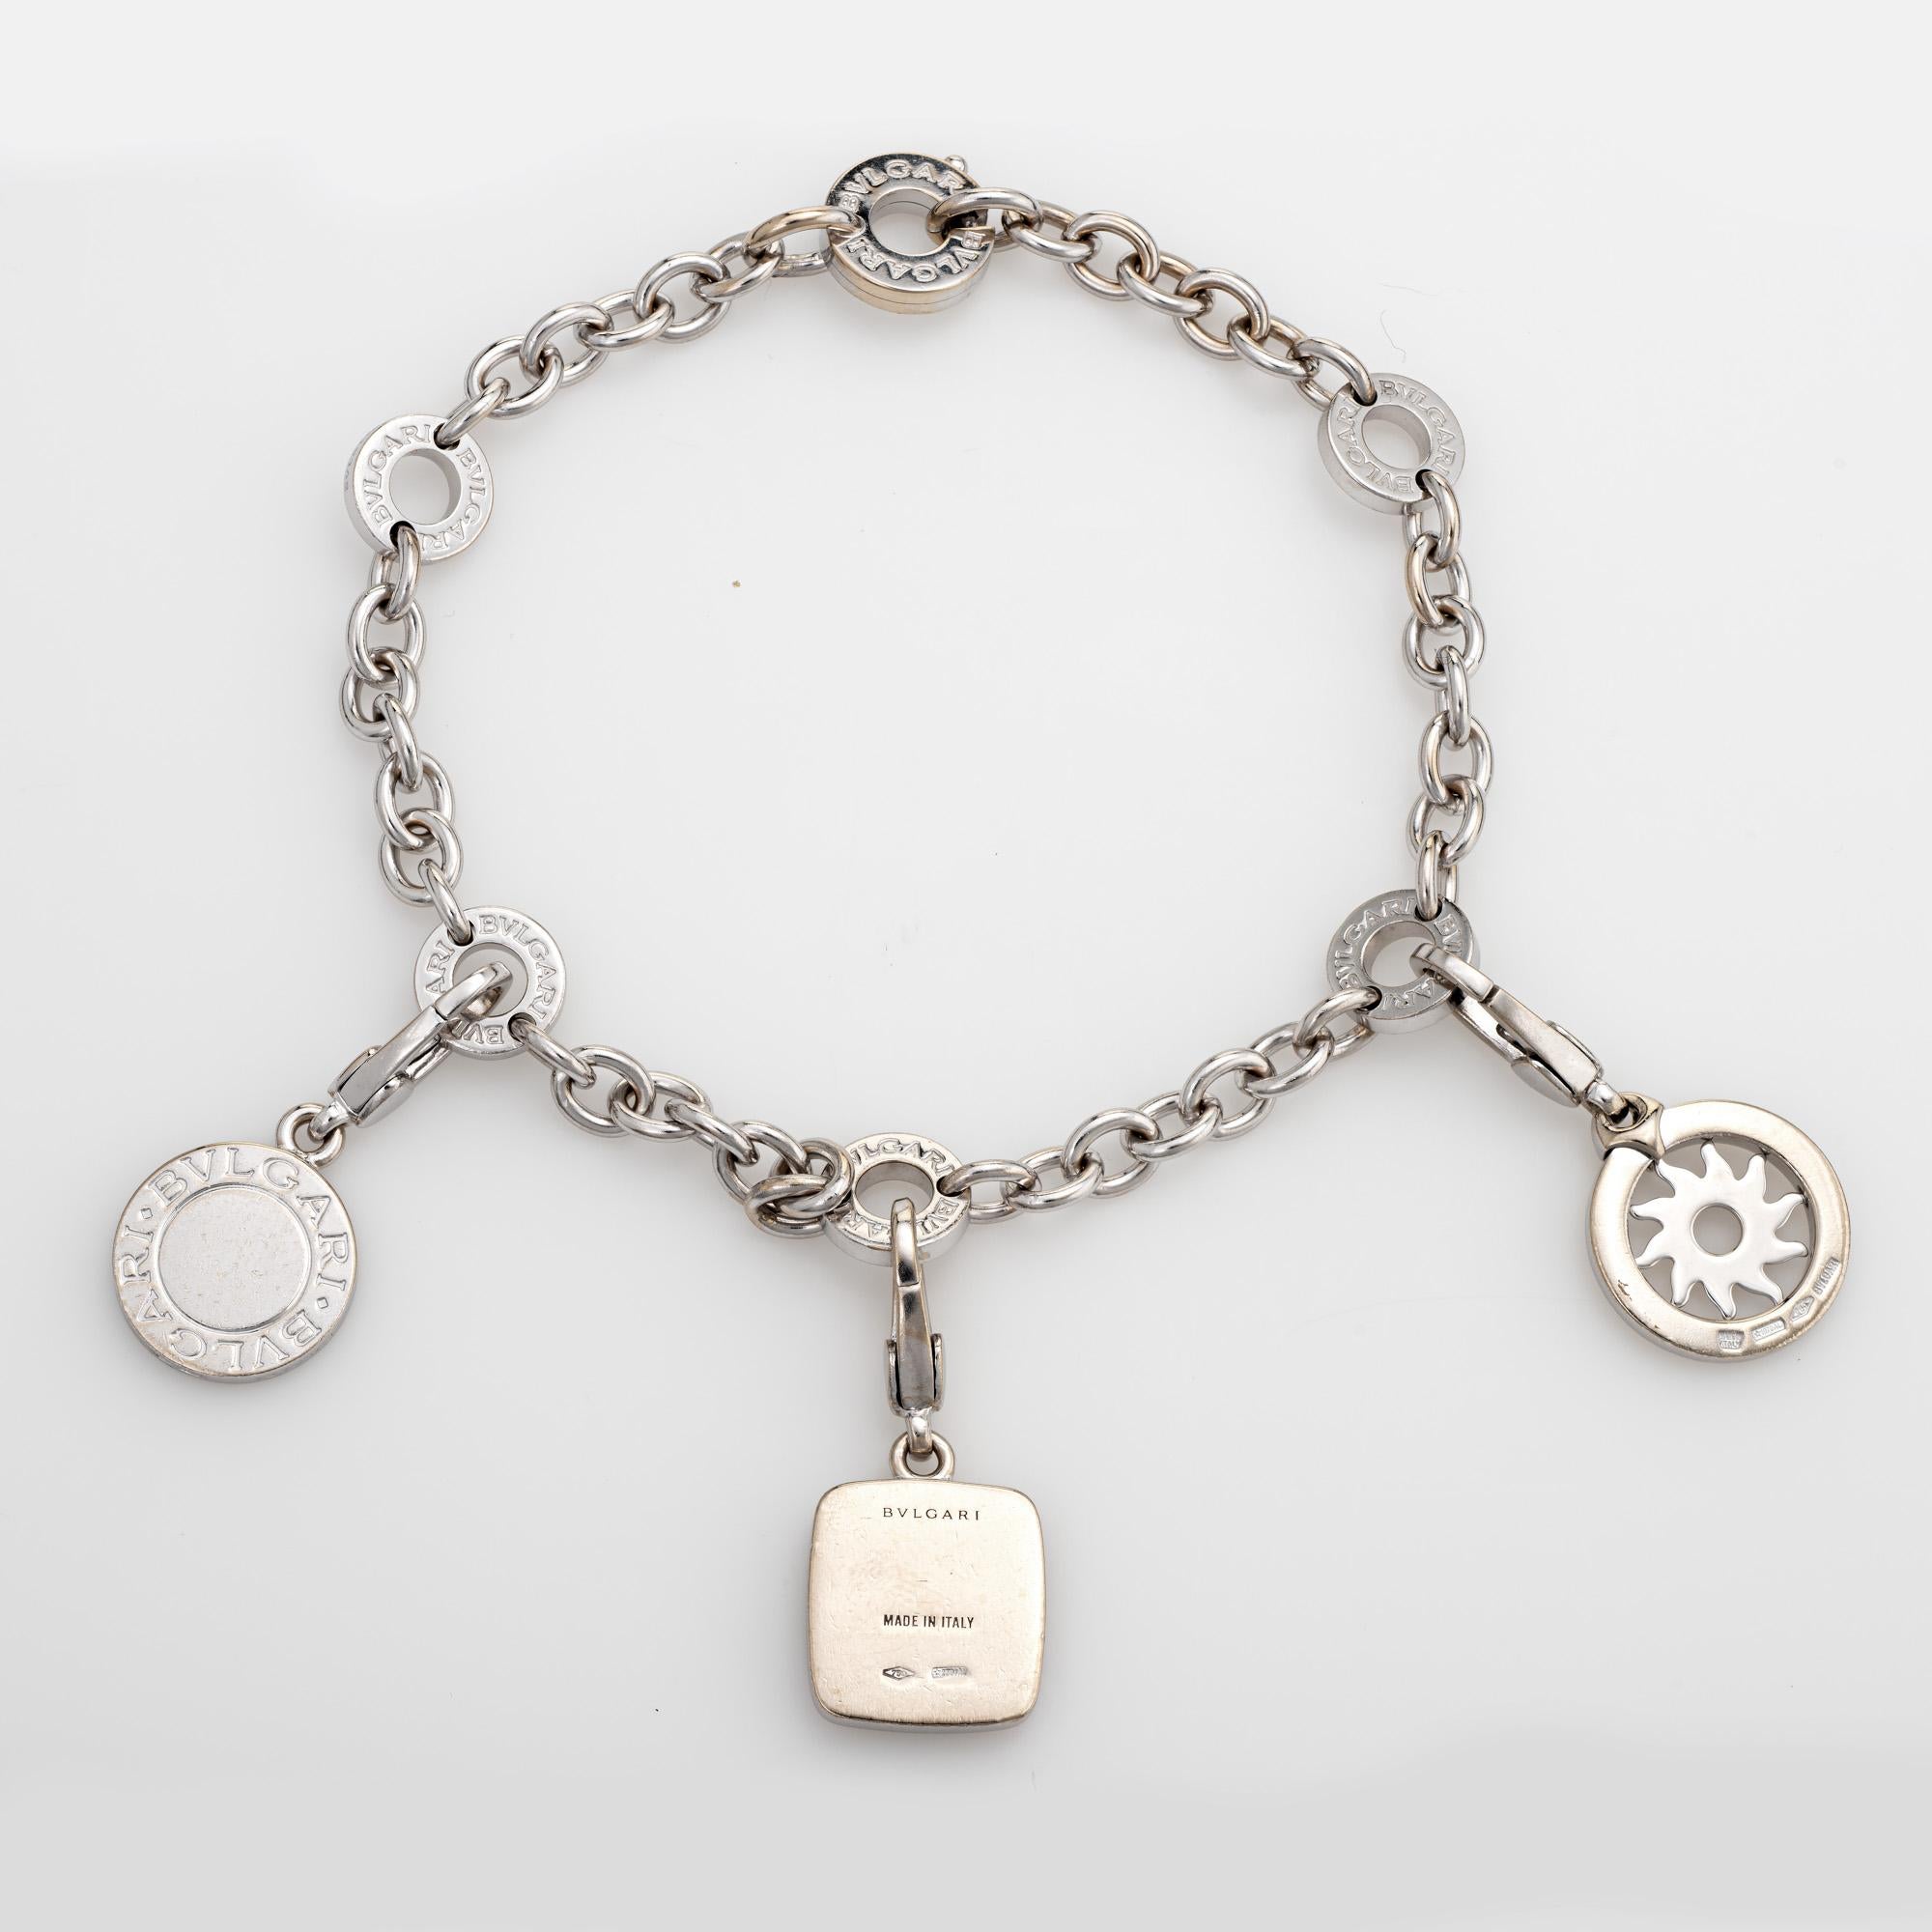 Stylish pre owned Bulgari 3 charm bracelet crafted in 18k white gold.  

The bracelet features three Bulgari charms, one set with lapis lazuli. The bracelet can accommodate more charms if desired. 

The bracelet is in very good condition and was